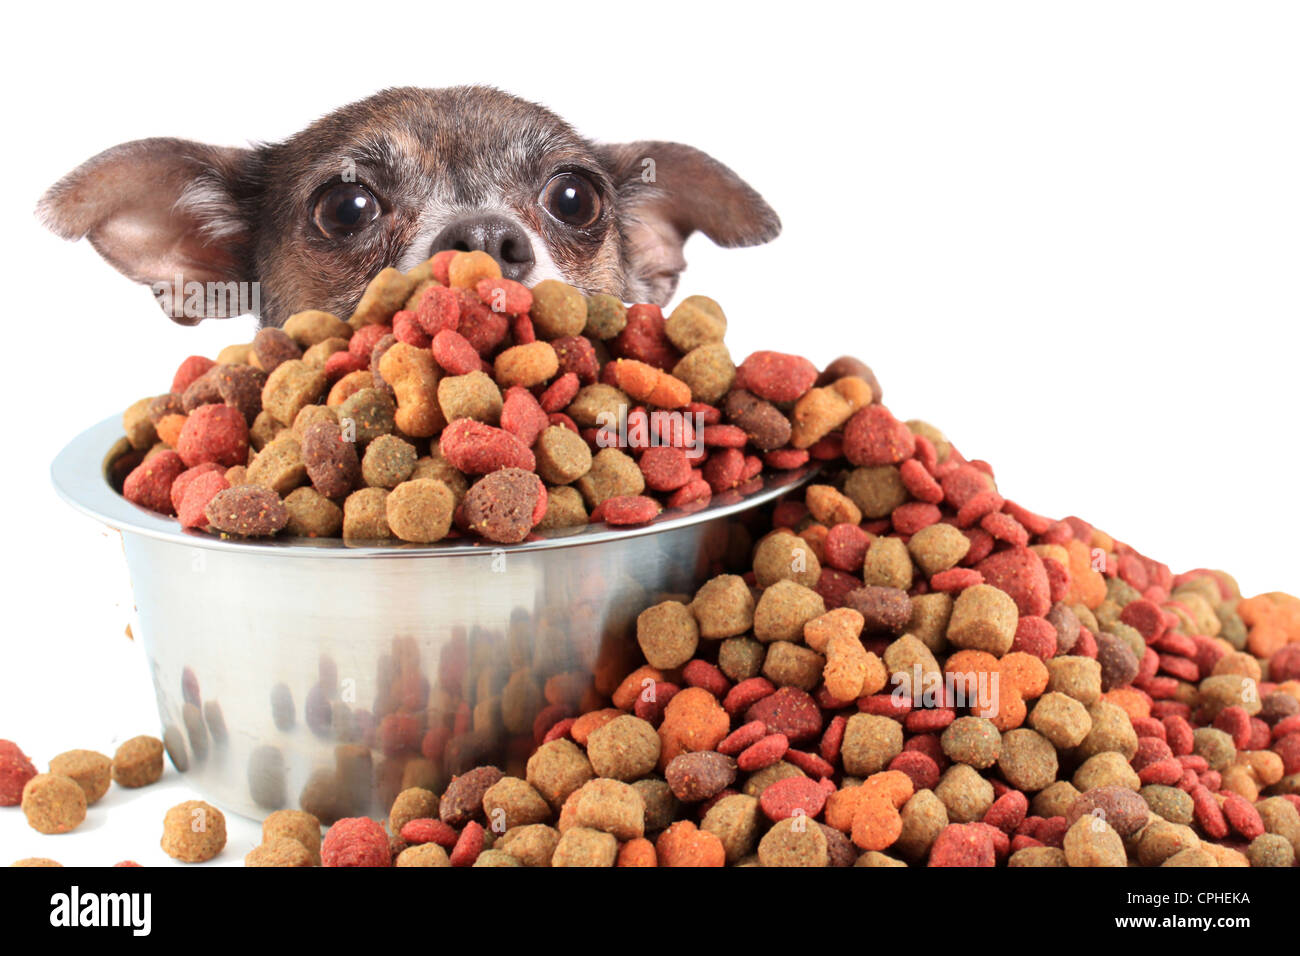 Little chihuahua peaking over large bowl of dog food too big for him Stock Photo